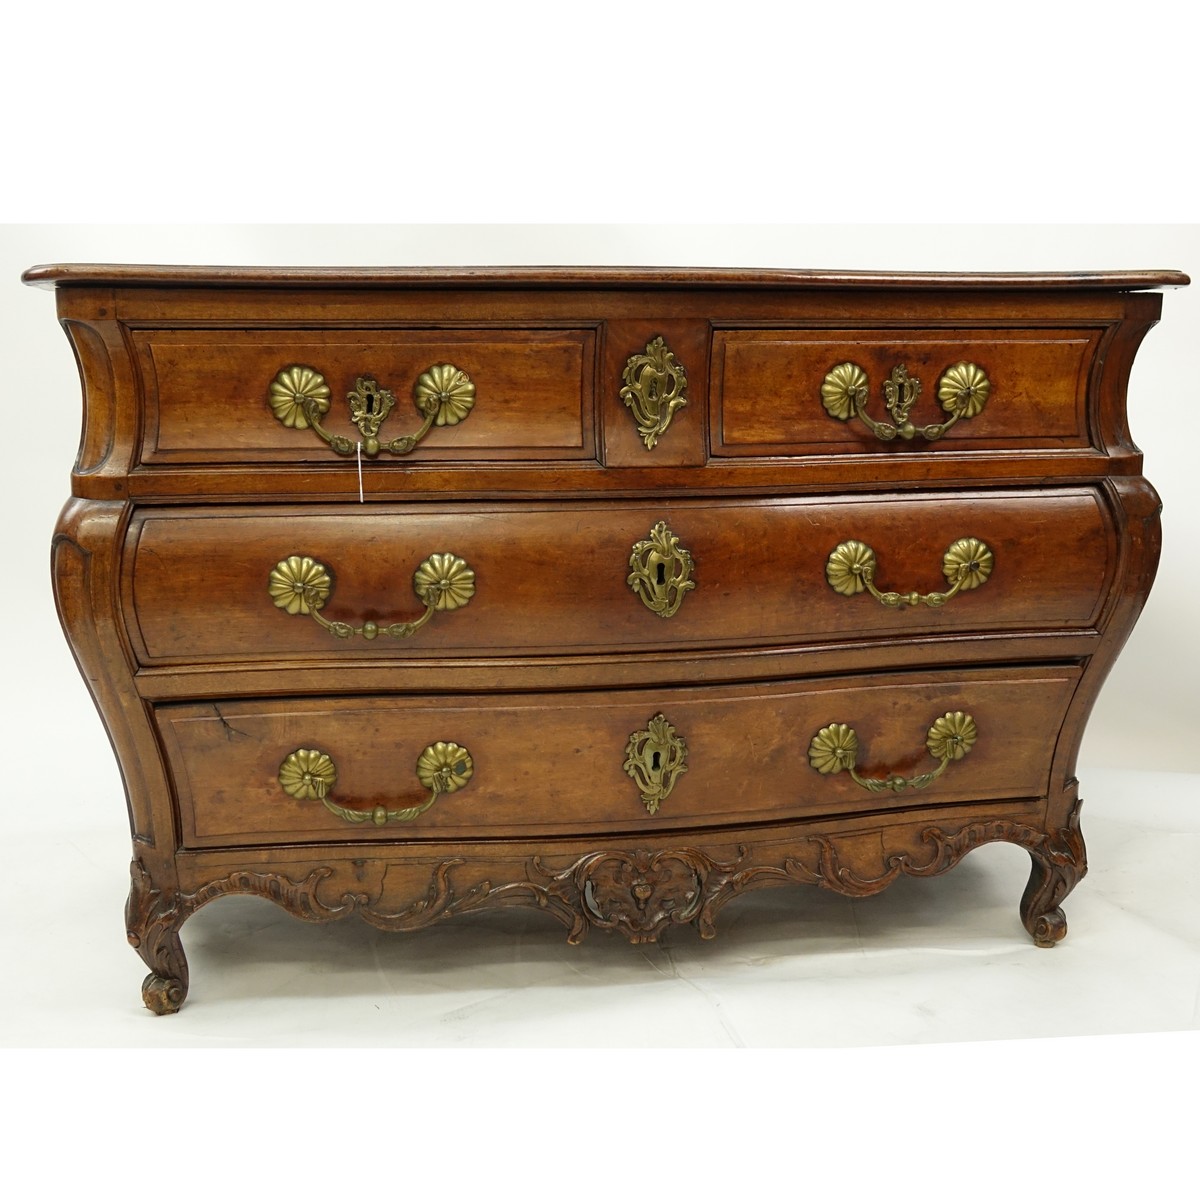 Good 18/19th Century Louis XV French Carved Walnut Commode en Tombeau. Two shaped single drawers with two large drawers.